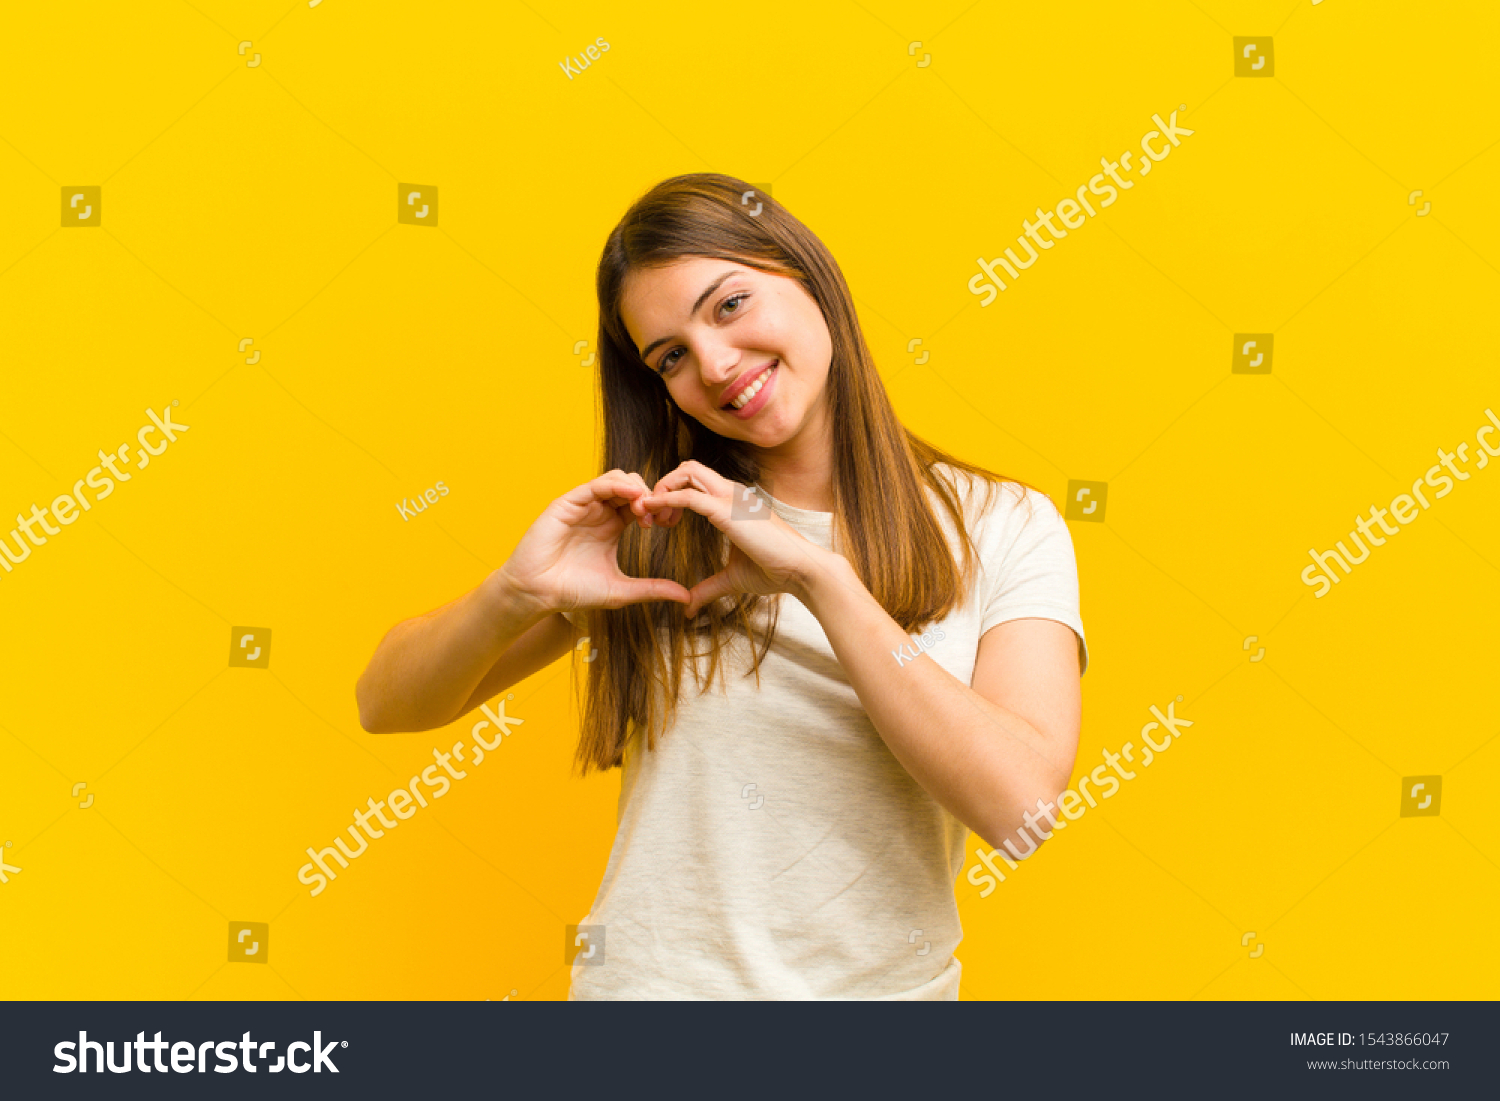 young pretty woman smiling and feeling happy, cute, romantic and in love, making heart shape with both hands against orange background #1543866047